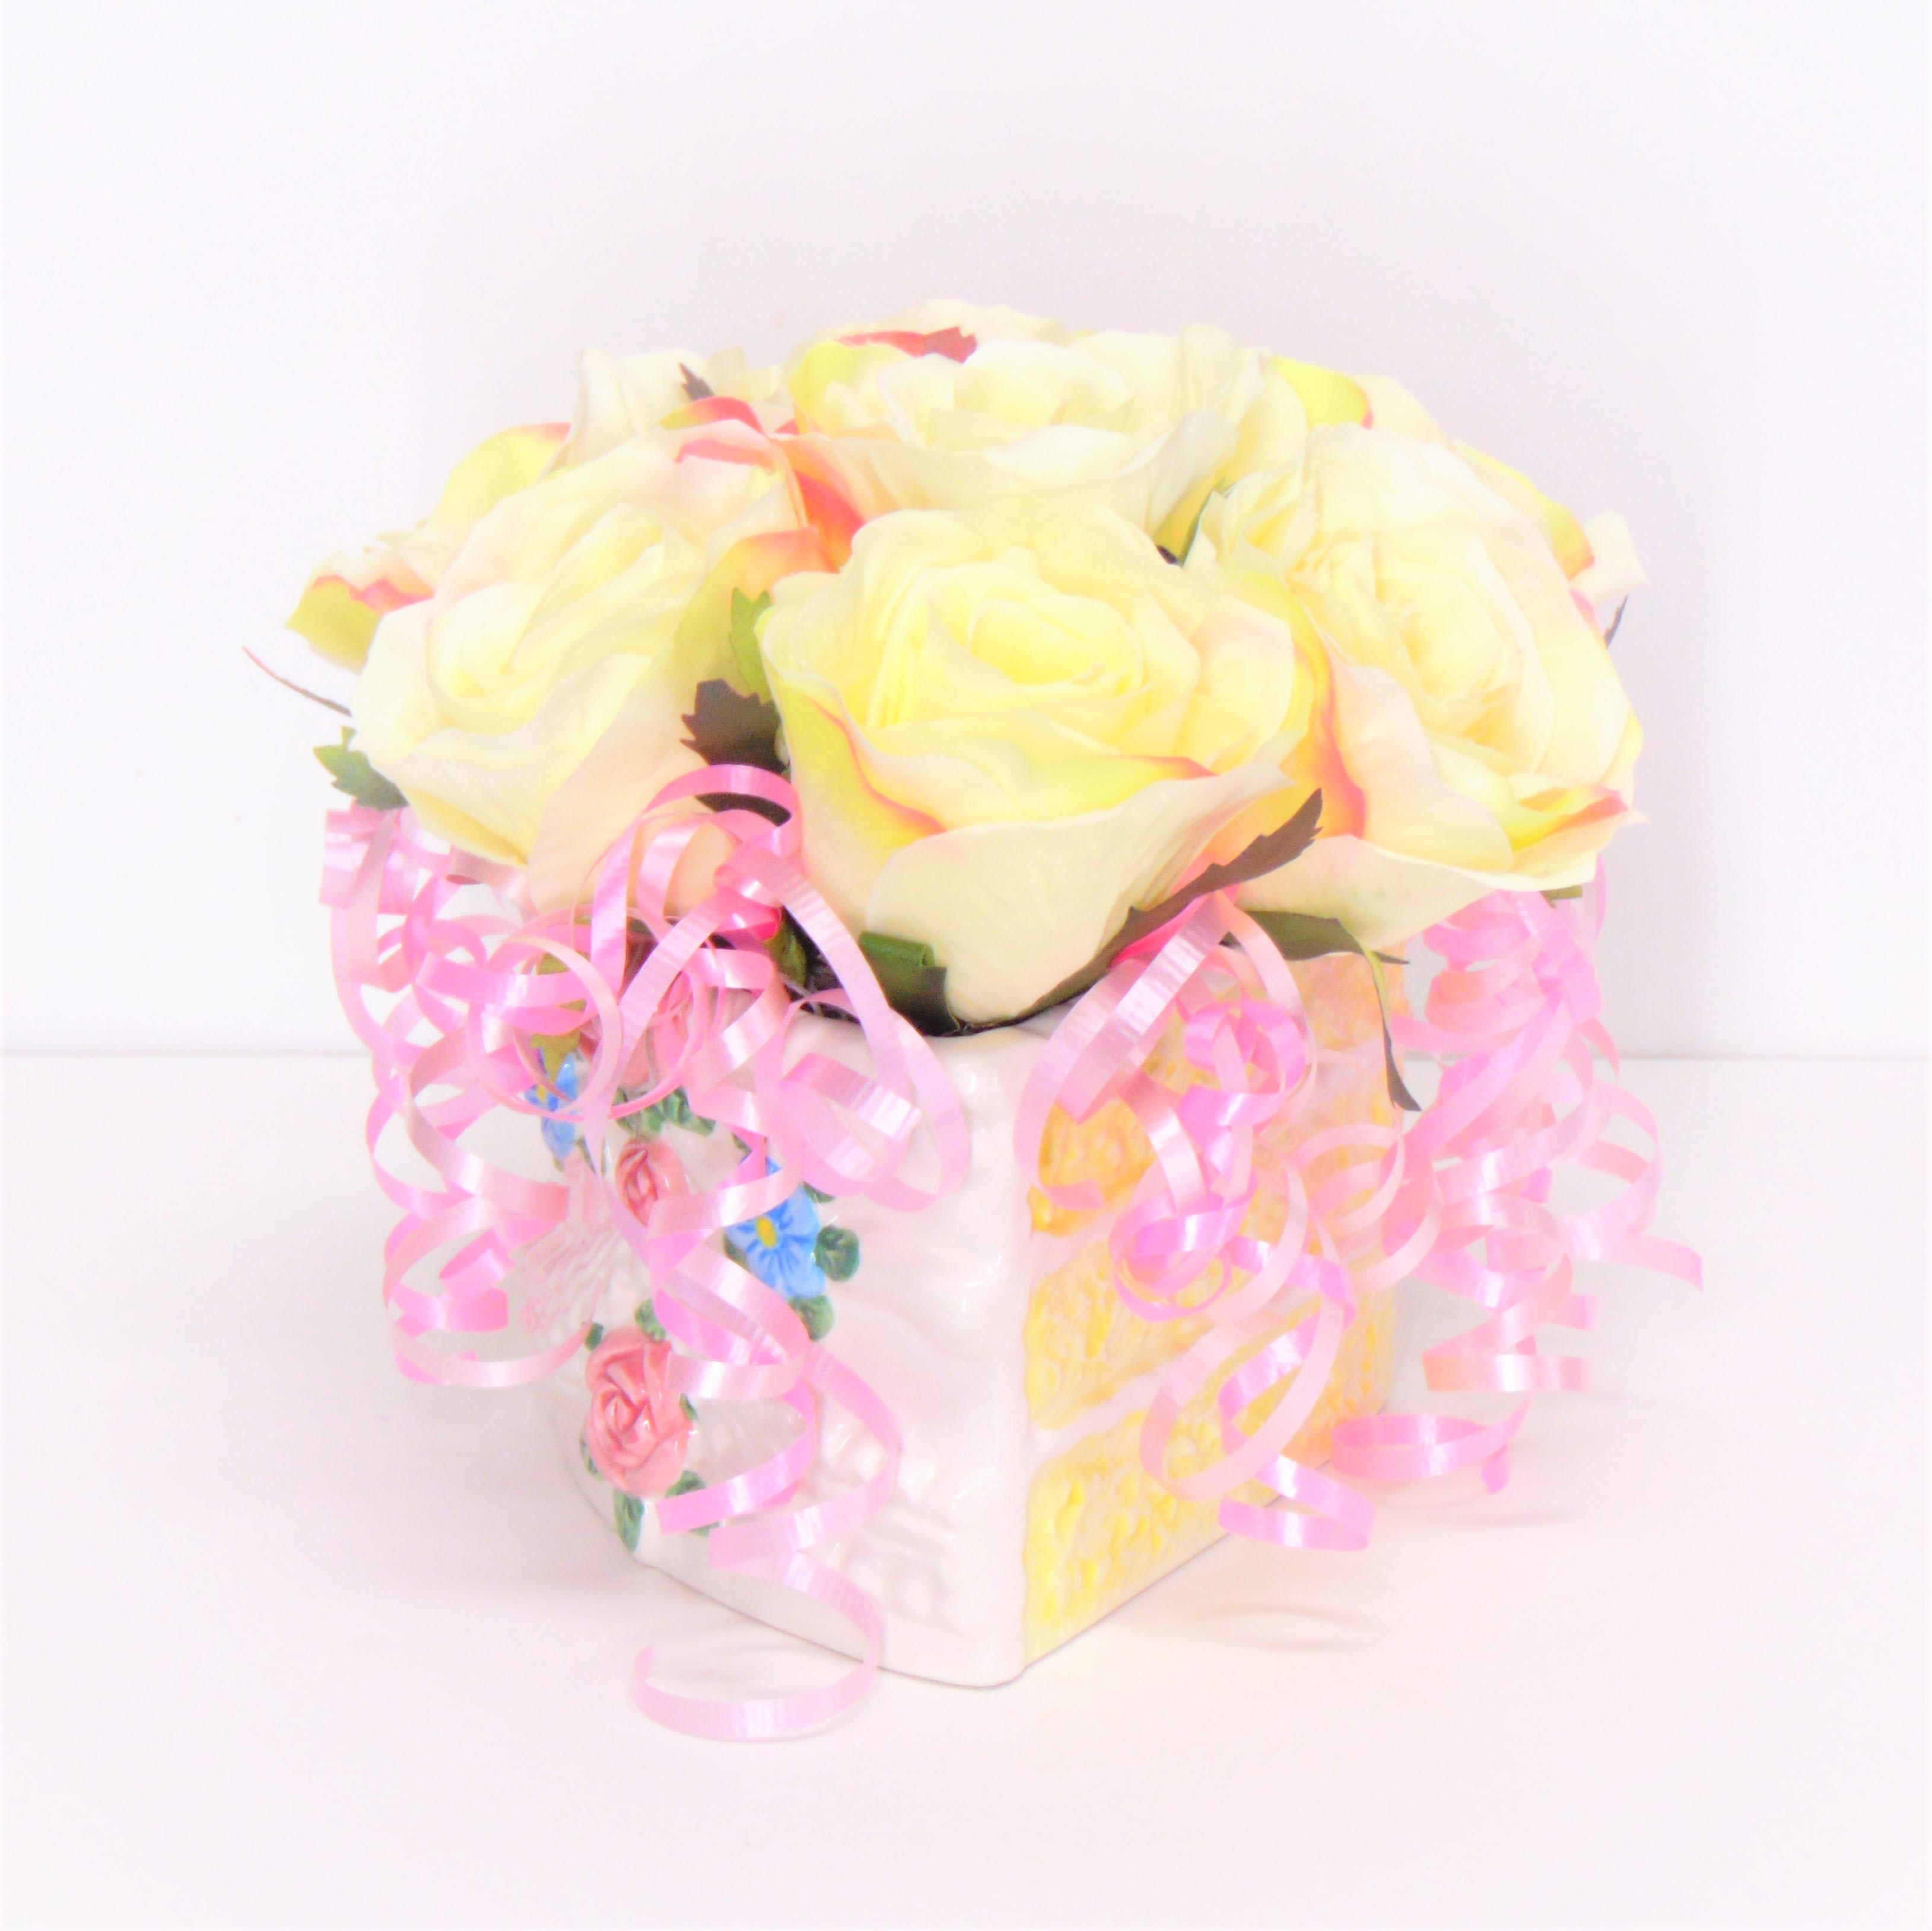 Birthday Cake Silk - A decorated porcelian cake filled with silk flowers and ribbons.